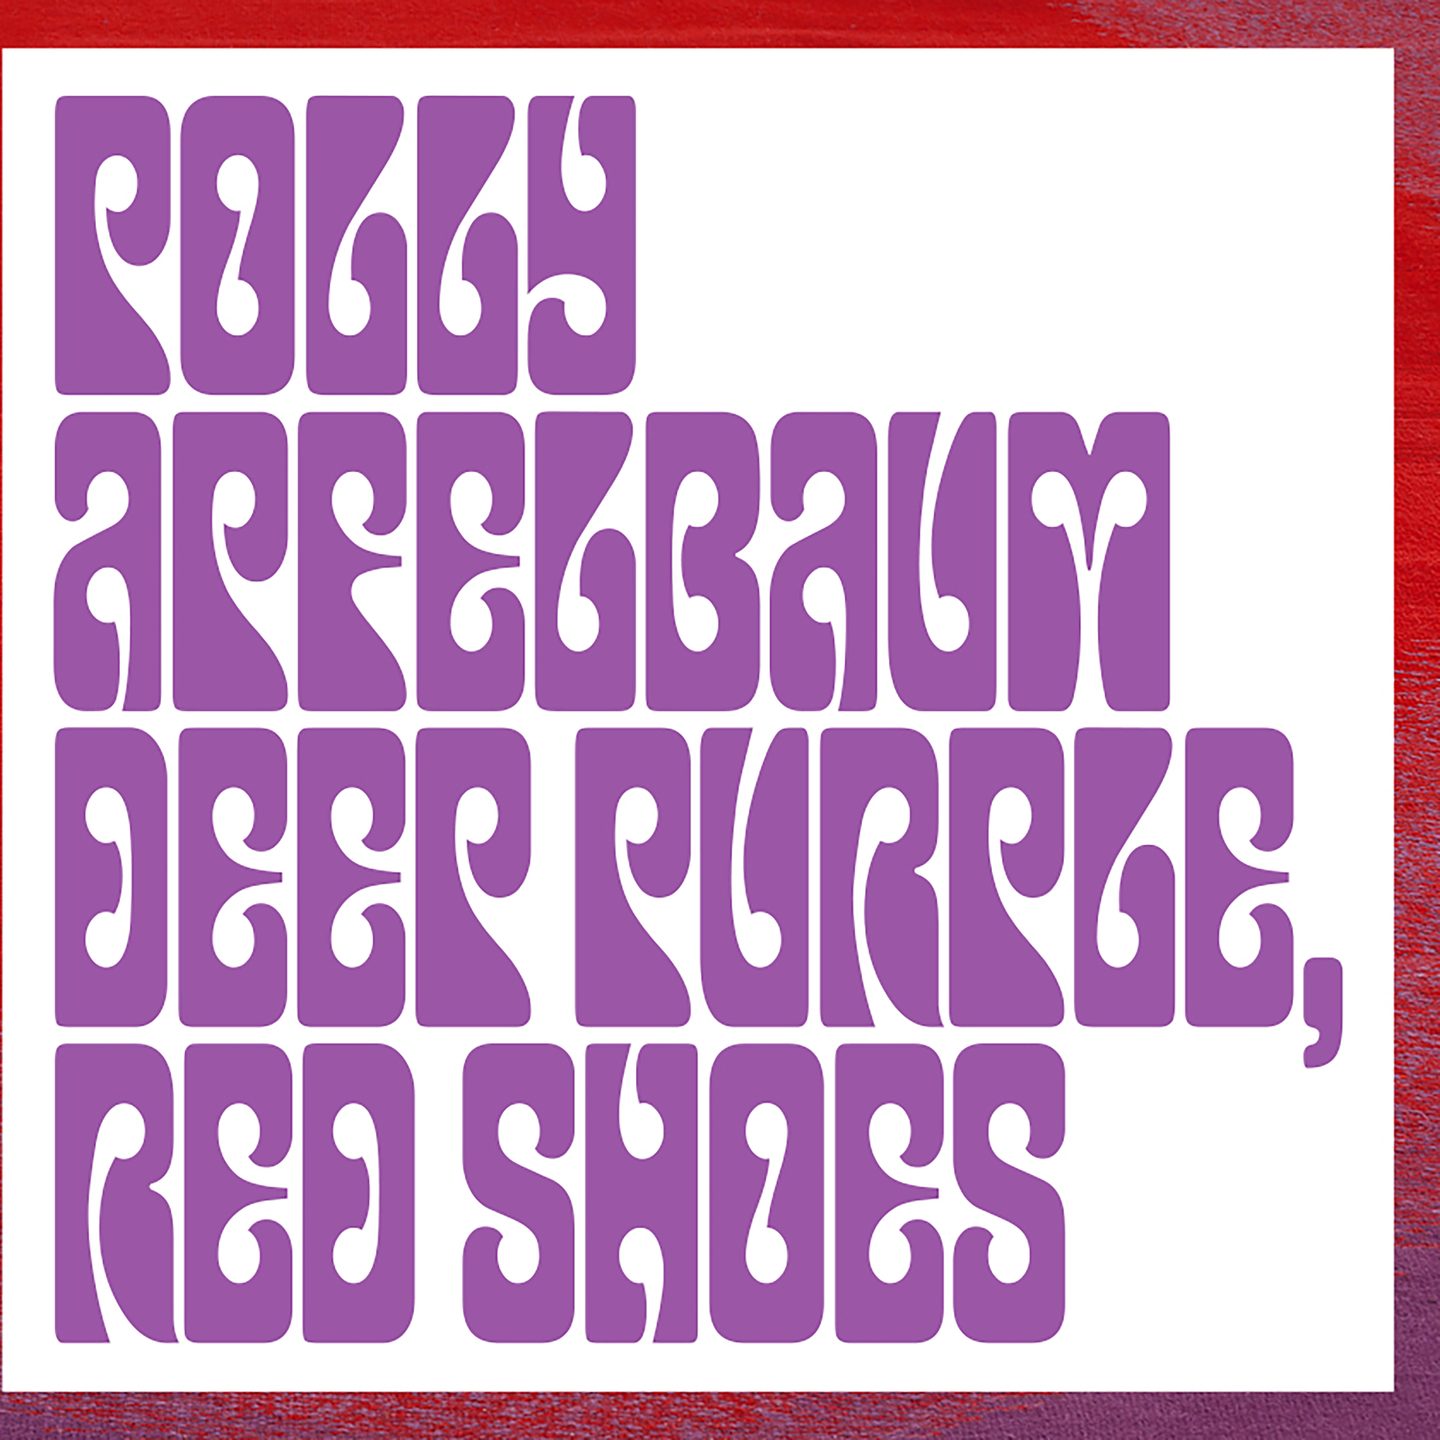 Deep Purple, Red Shoes